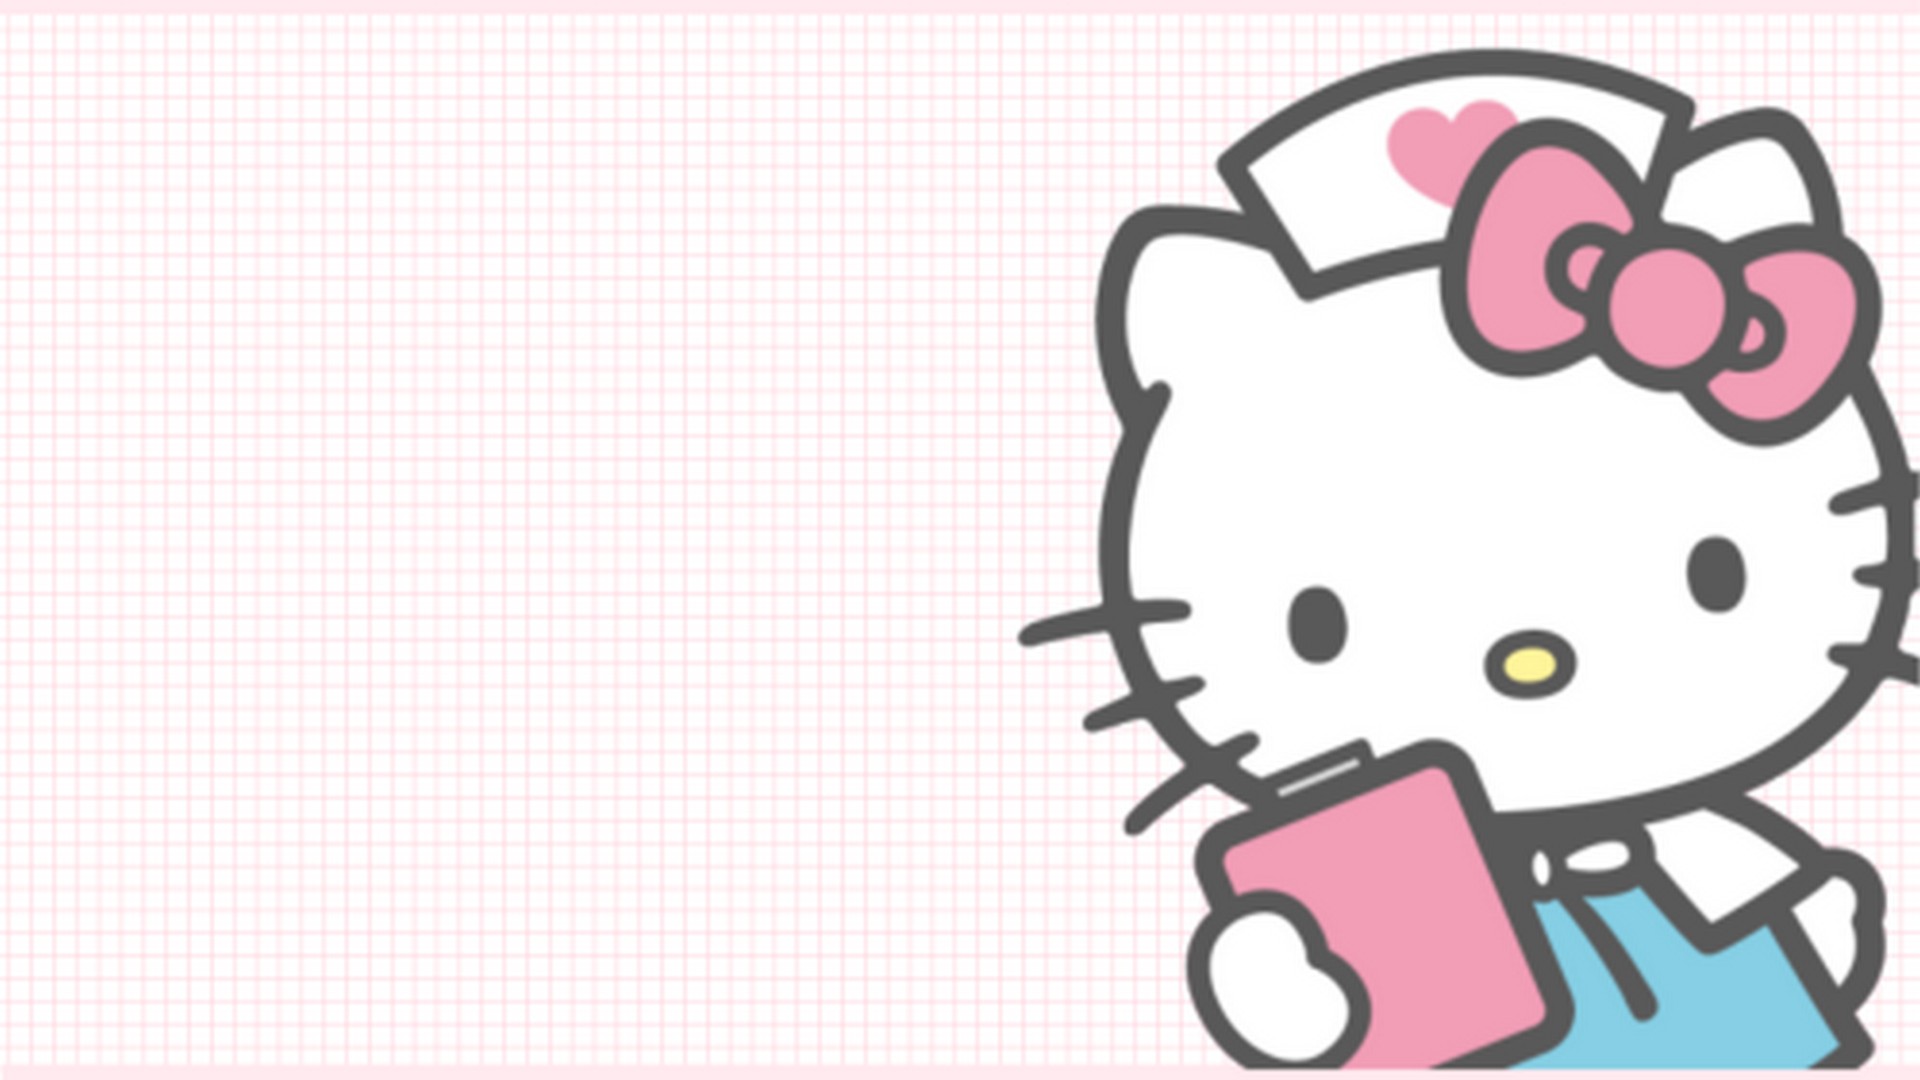 Wallpaper Hello Kitty Characters Desktop with resolution 1920X1080 pixel. You can use this wallpaper as background for your desktop Computer Screensavers, Android or iPhone smartphones